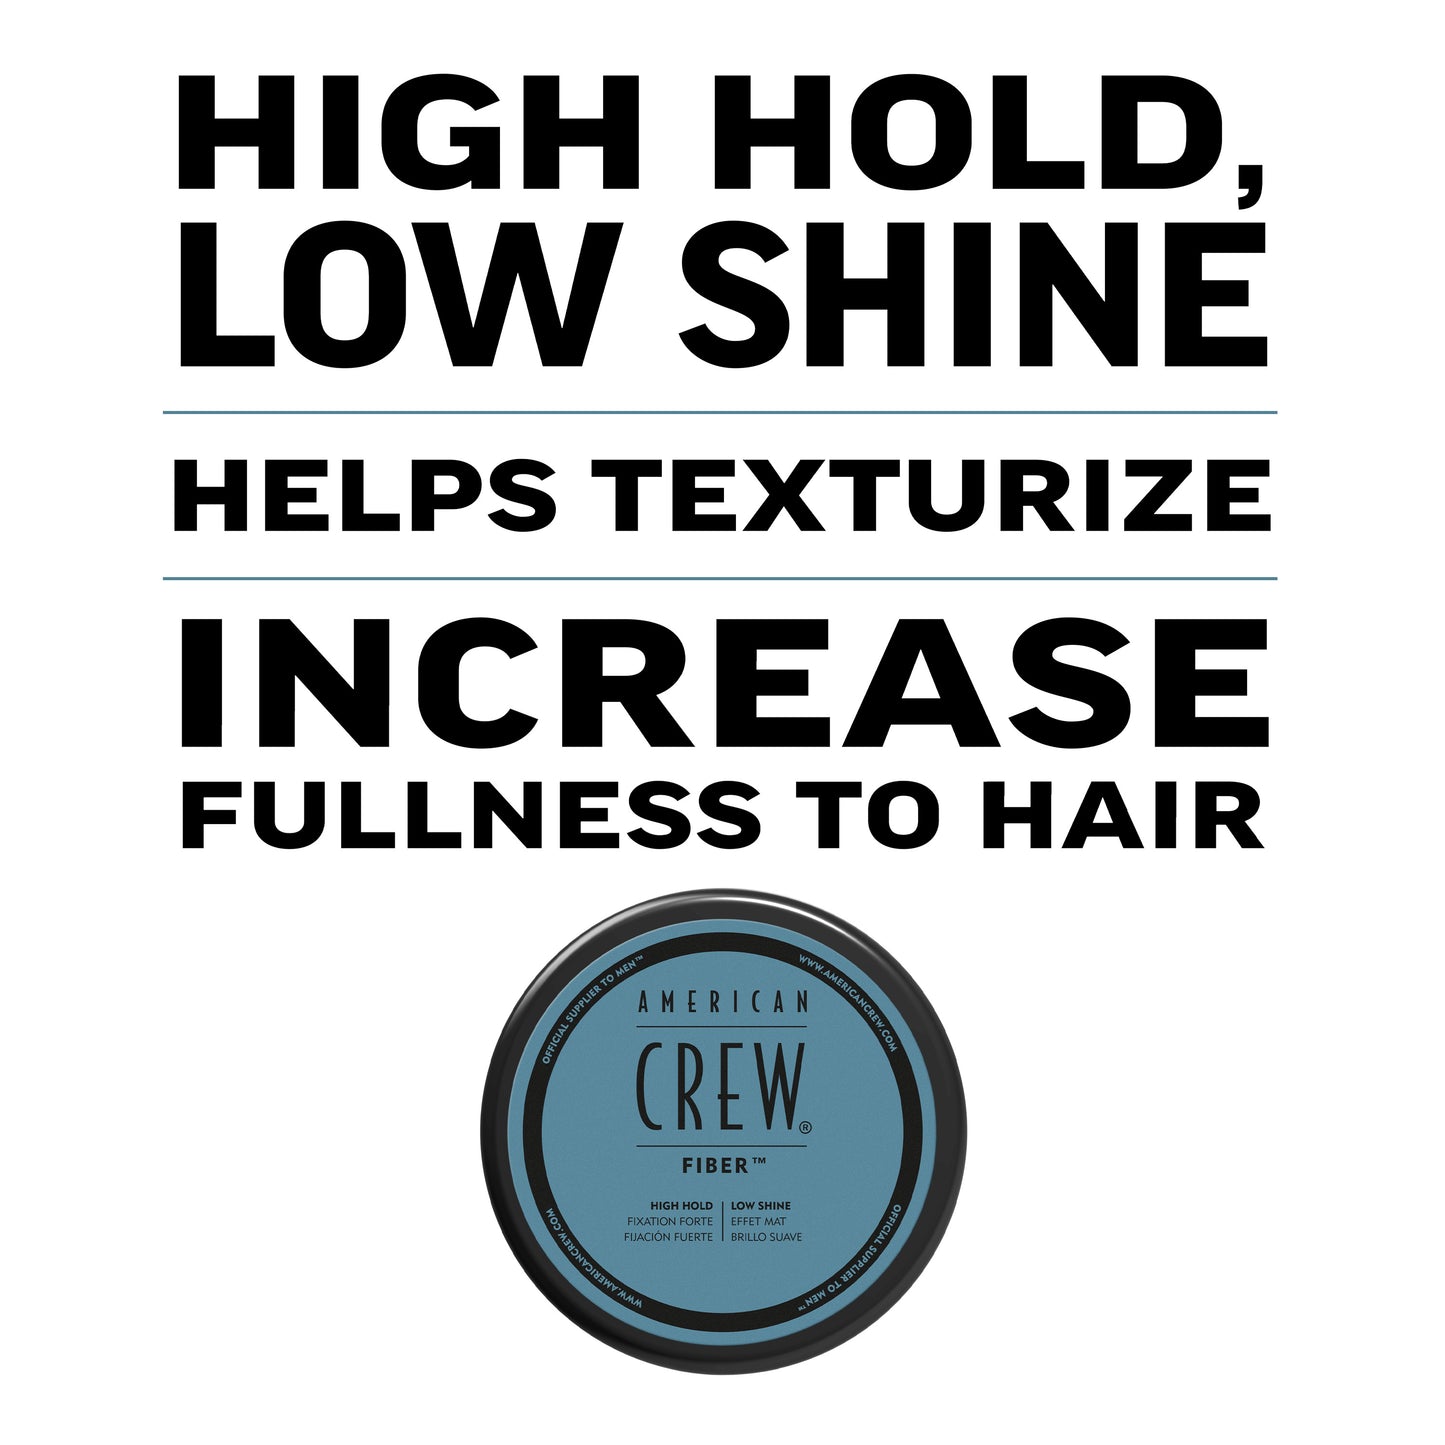 American Crew Fiber 1.7 Oz, Provides Texture With Added Thickness And A Matte Finish